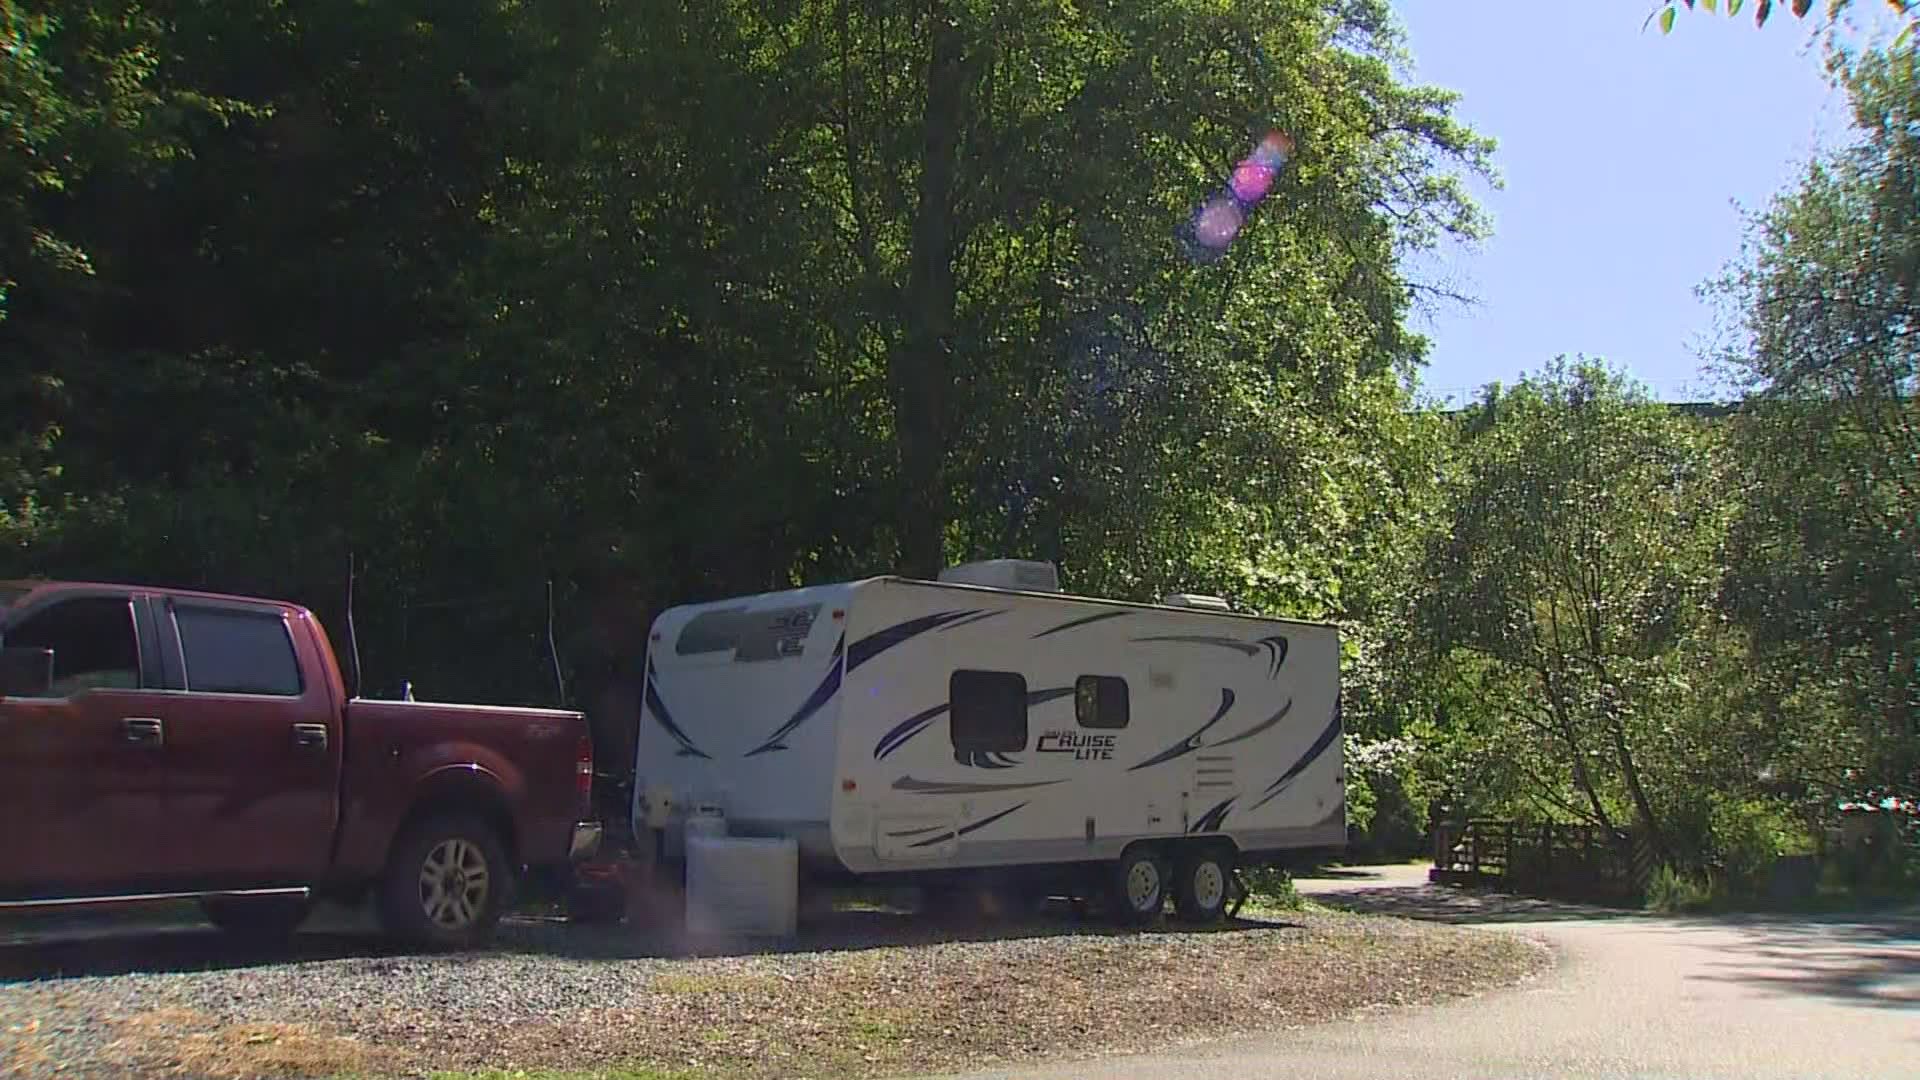 Park officials are warning campers looking for last-minute reservations to make sure they have a backup plan.